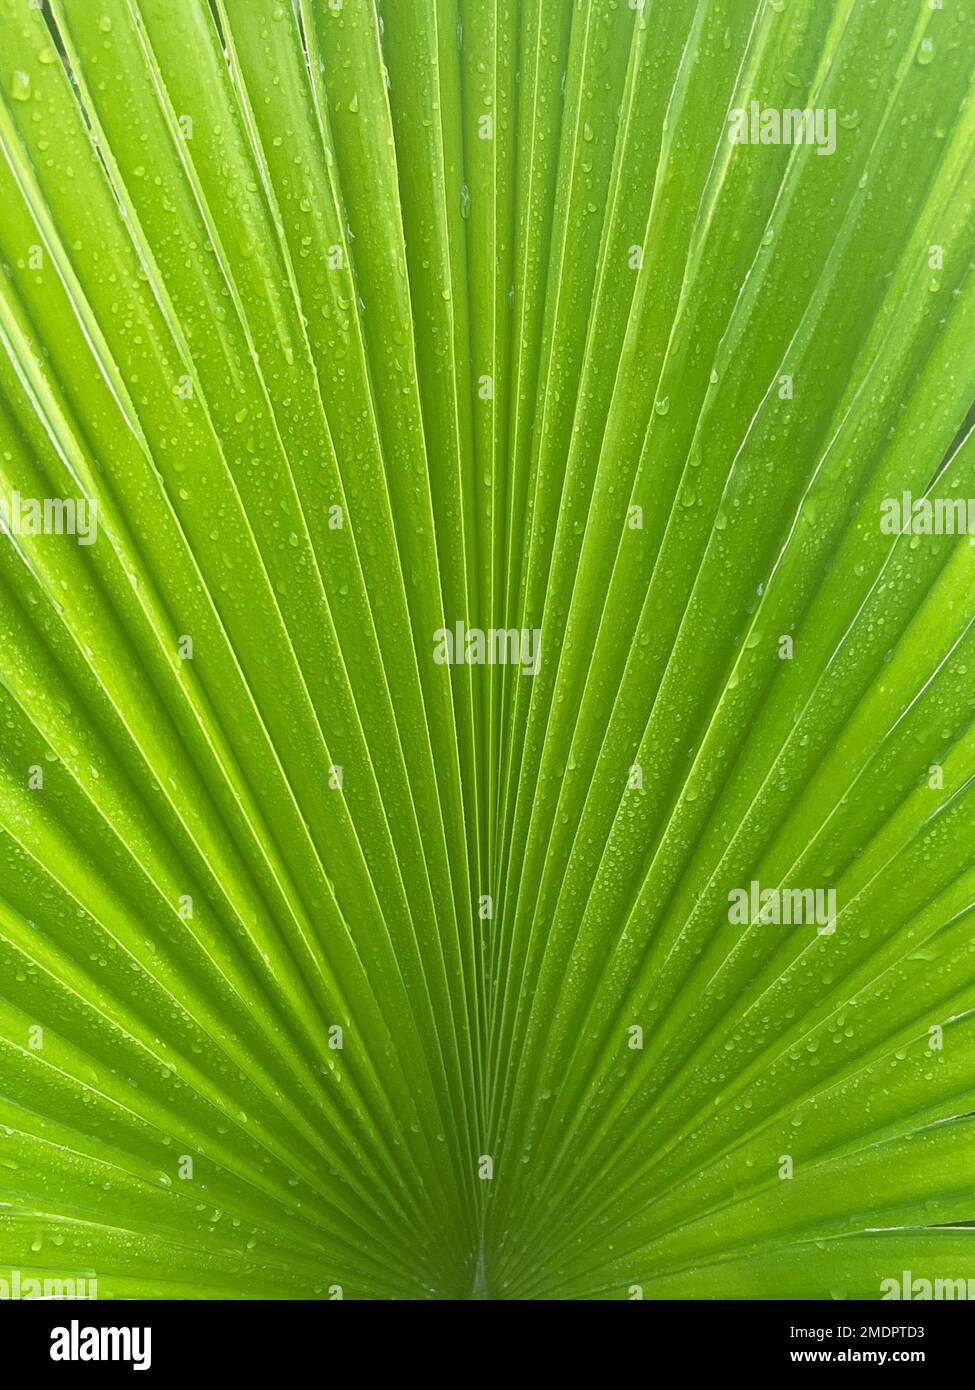 Green palm tree leaf close up background Stock Photo